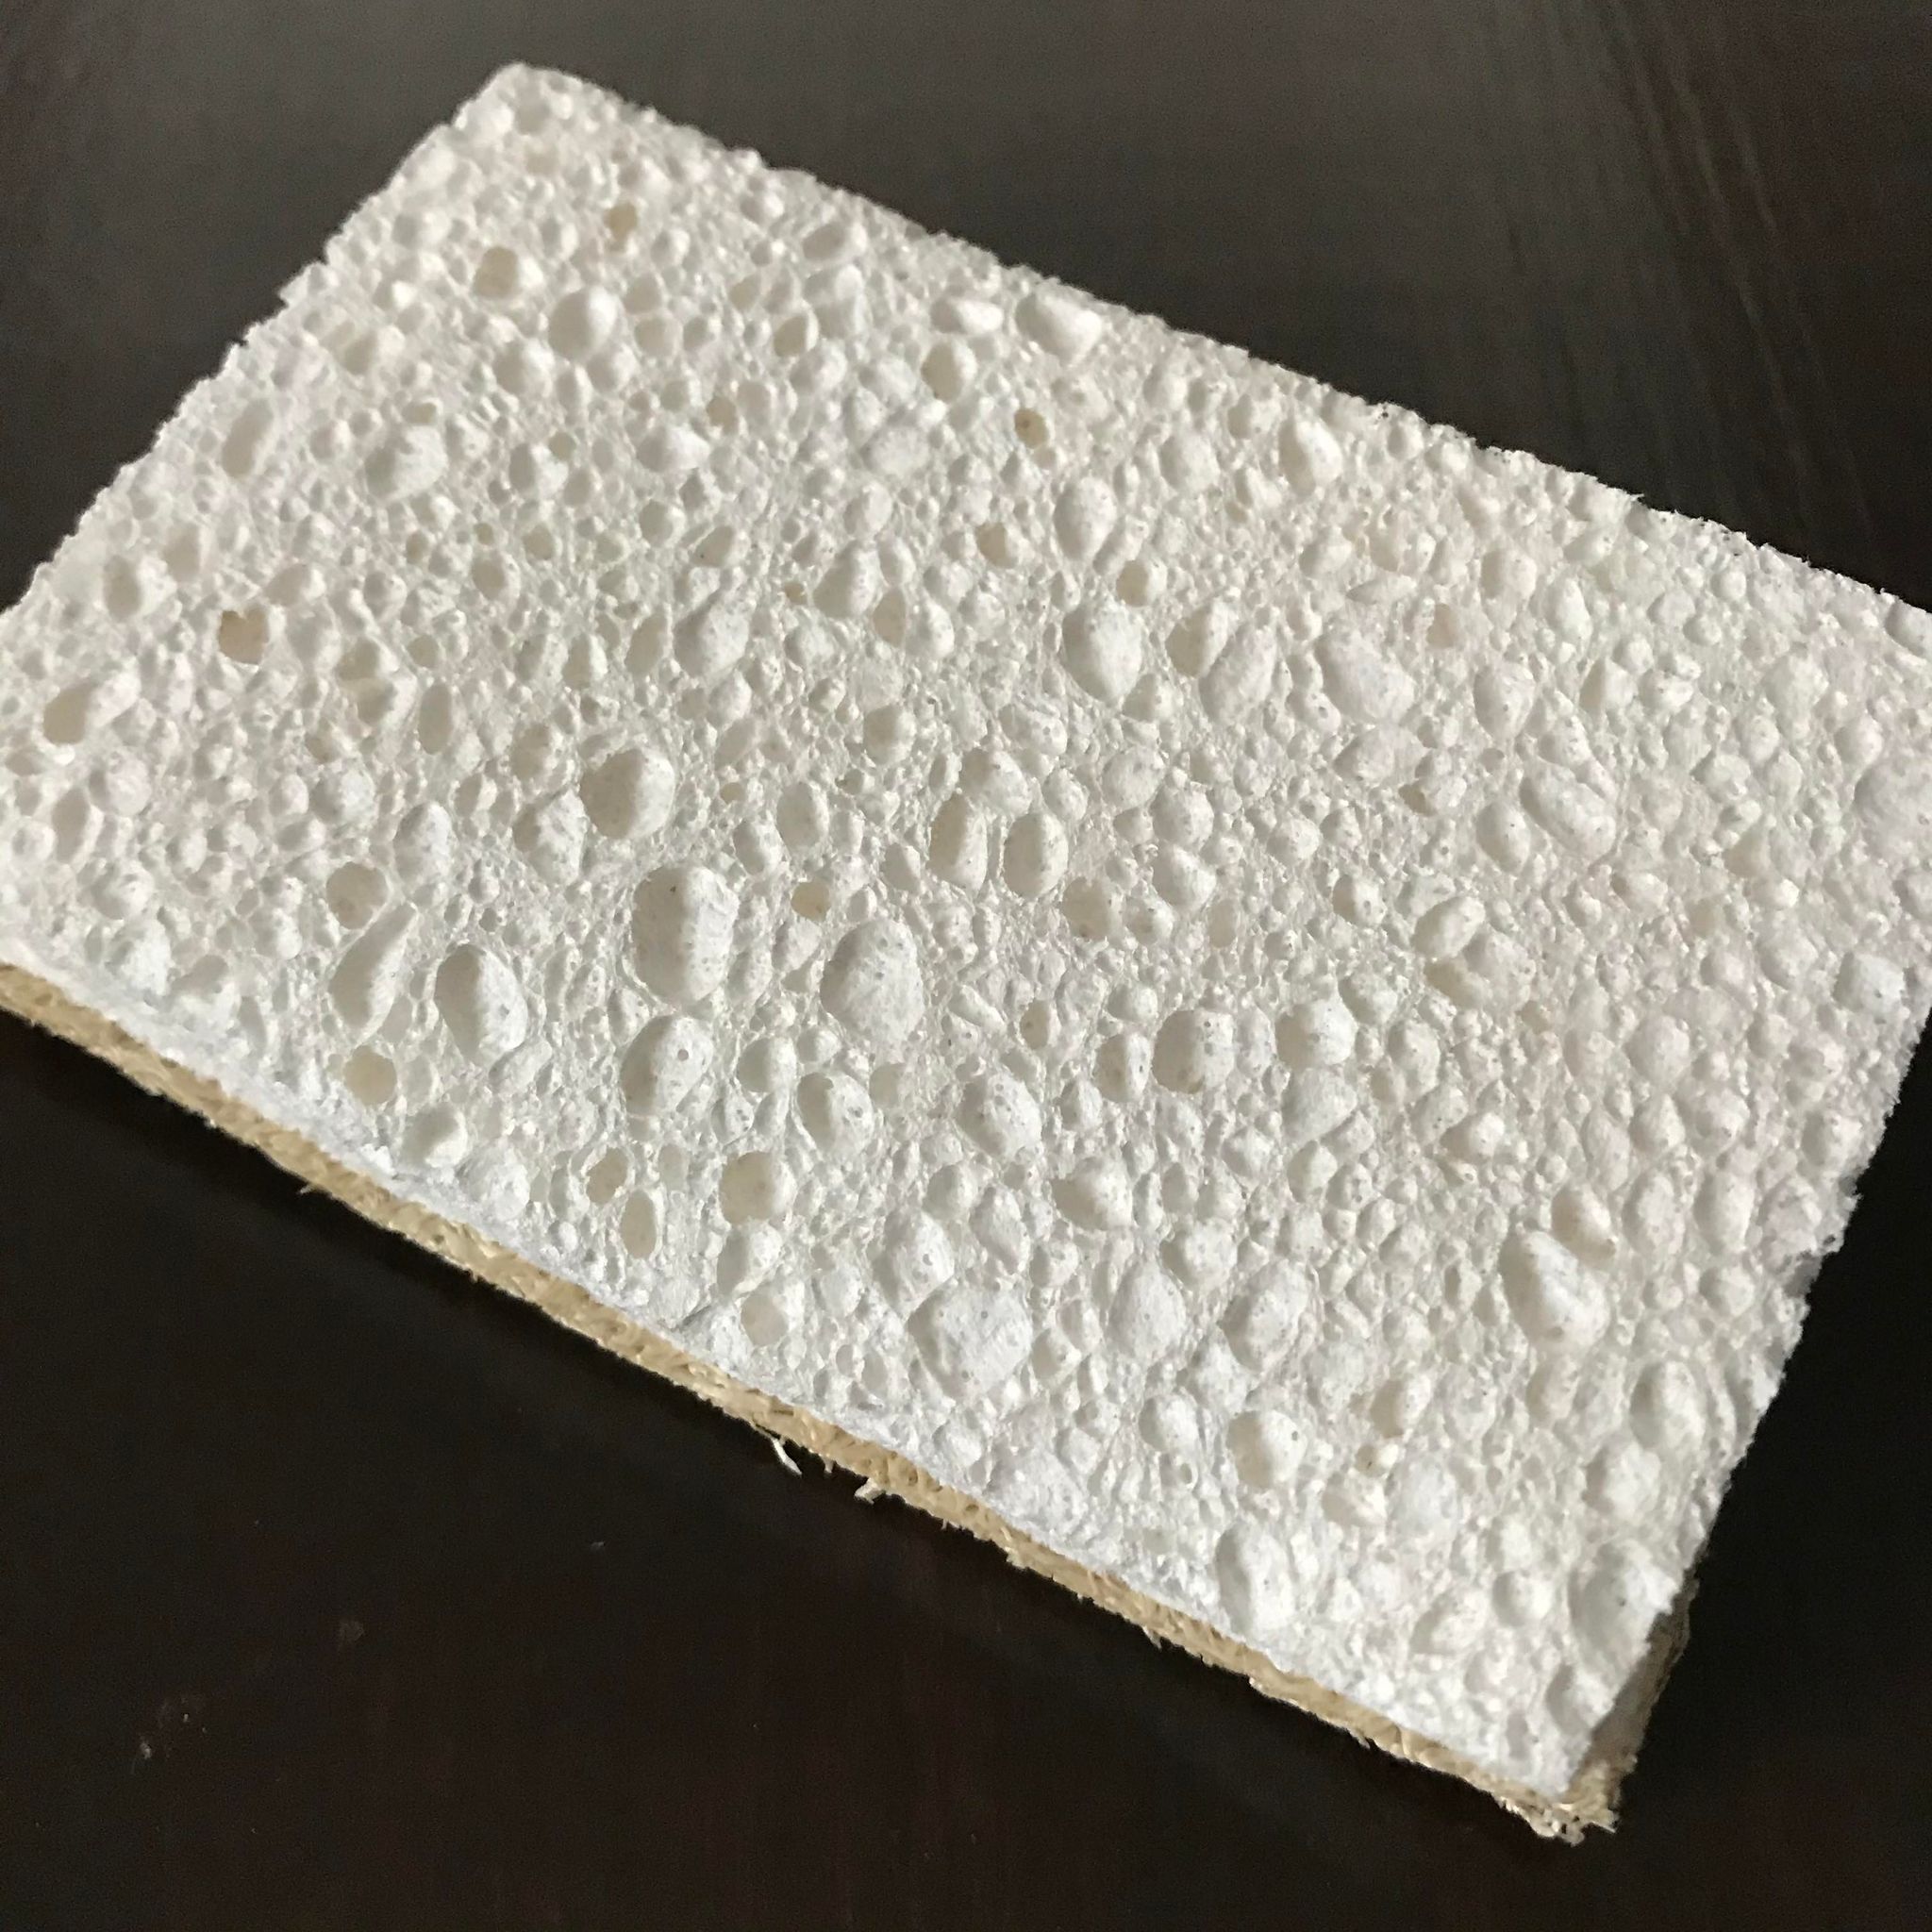 The white part of this compostable sponge is spongy and absorbent, made of wood pulp while the yellow-brown part is scrubby and helps soap become sudsy, made of loofah